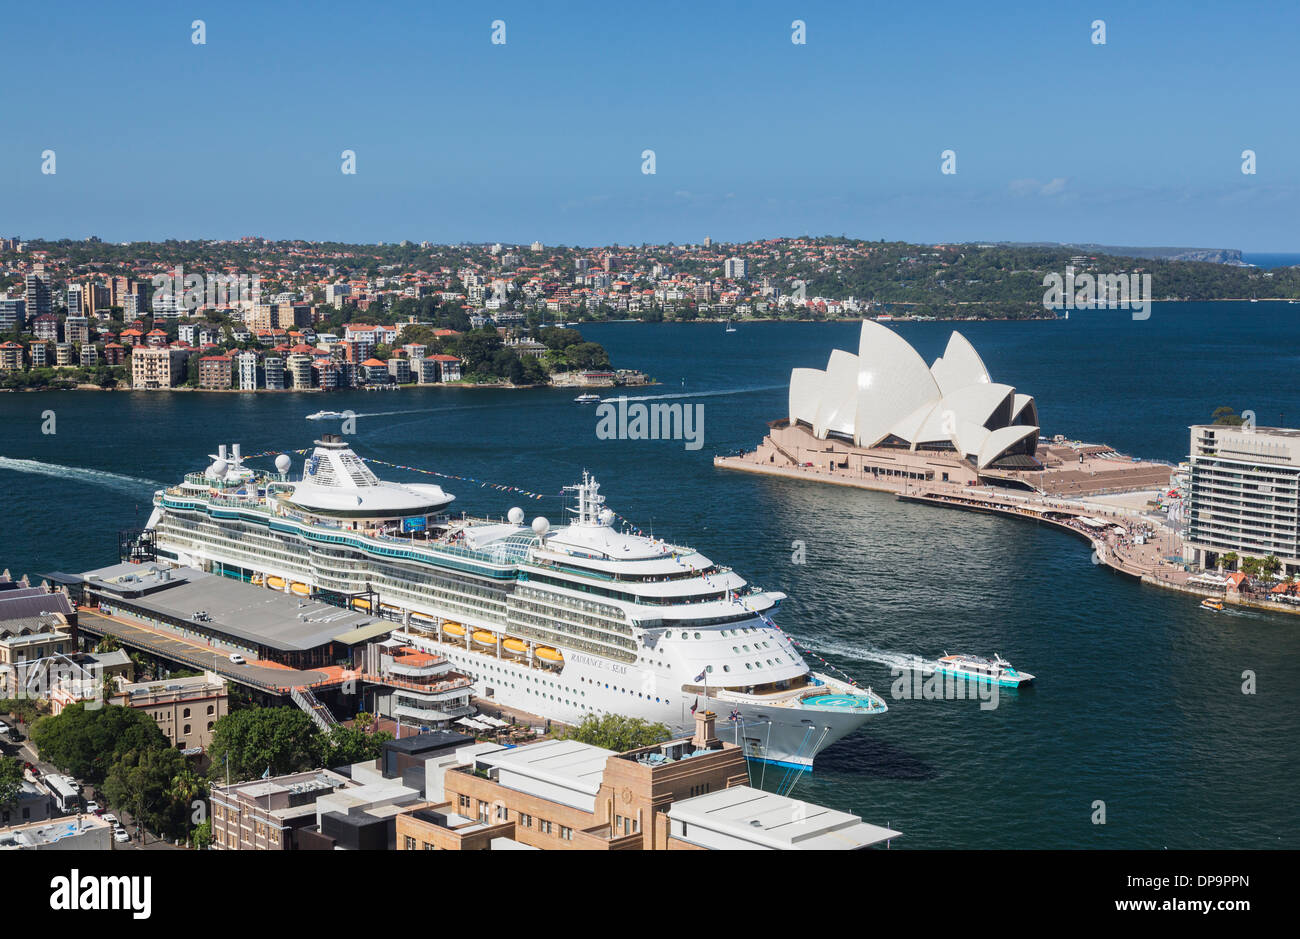 Sydney Harbour with a Cruise ship docked in the harbor, Australia Stock Photo